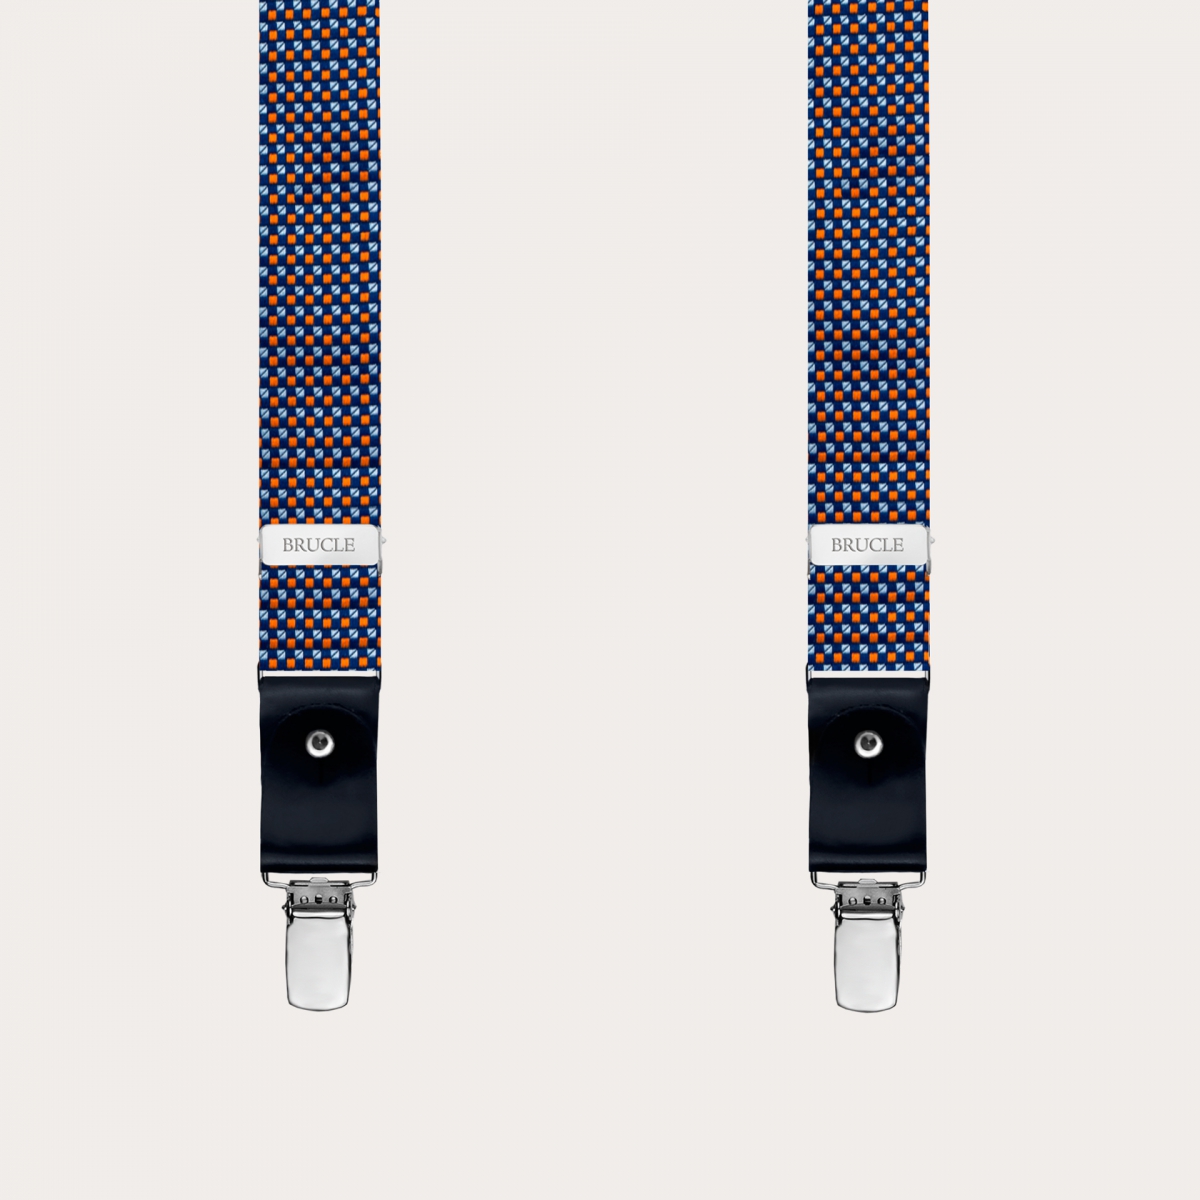 BRUCLE Thin suspenders in multicolored geometric patterned silk